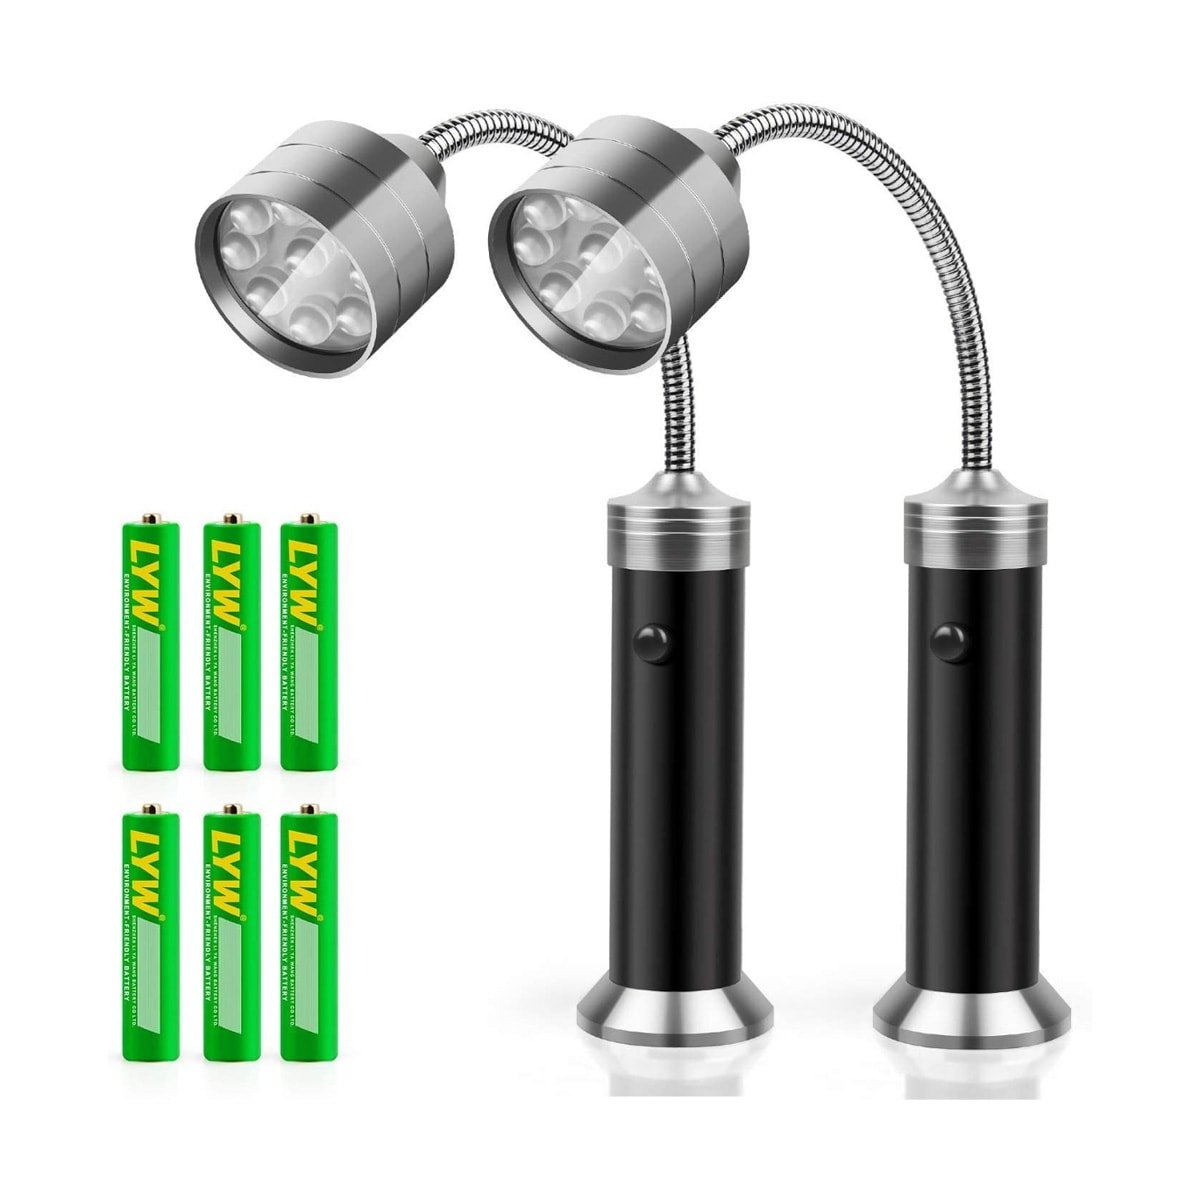 A pair of stainless steel magnetic lights that can be attached to barbecues along with some batteries.